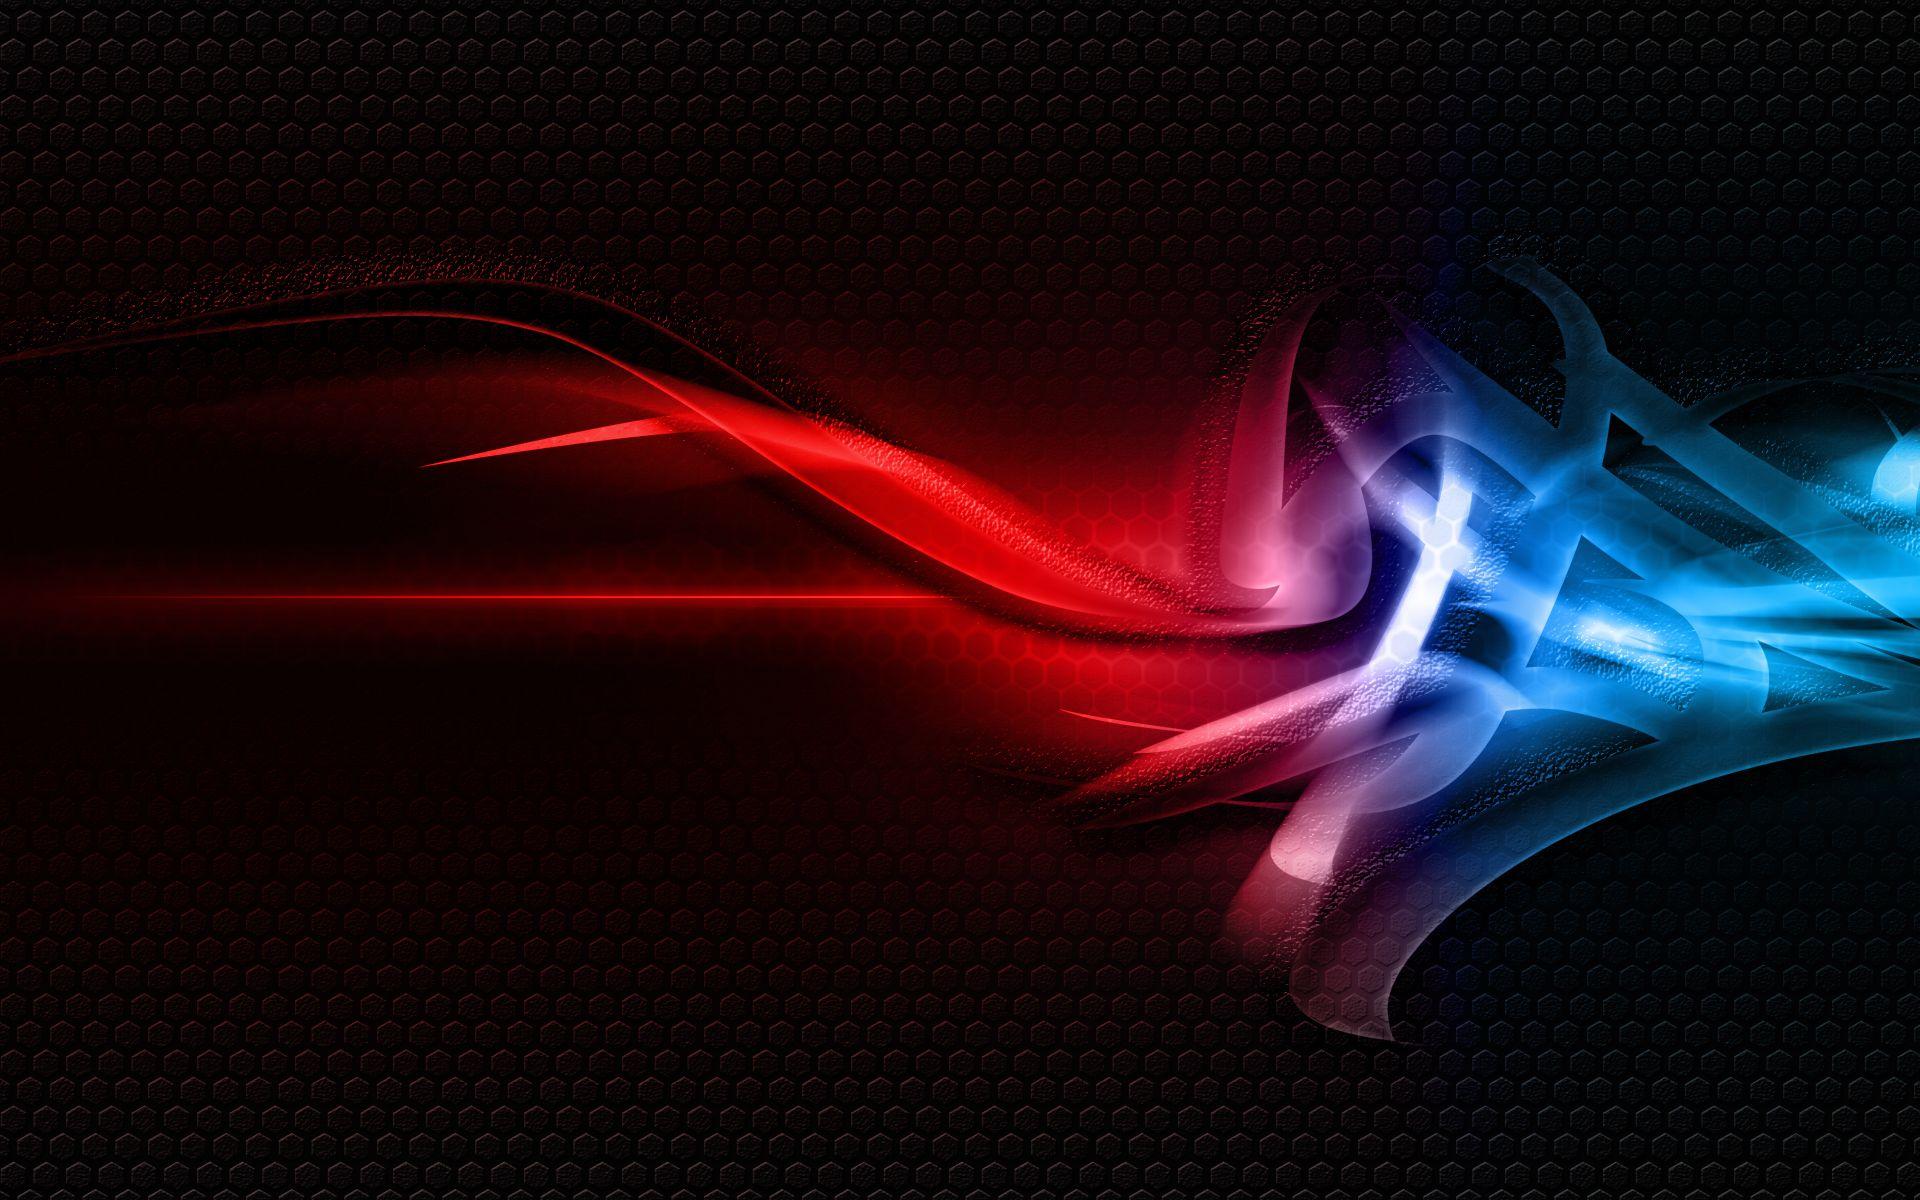 3D & abstract Wallpaper: Red White And Blue Wallpaper Background